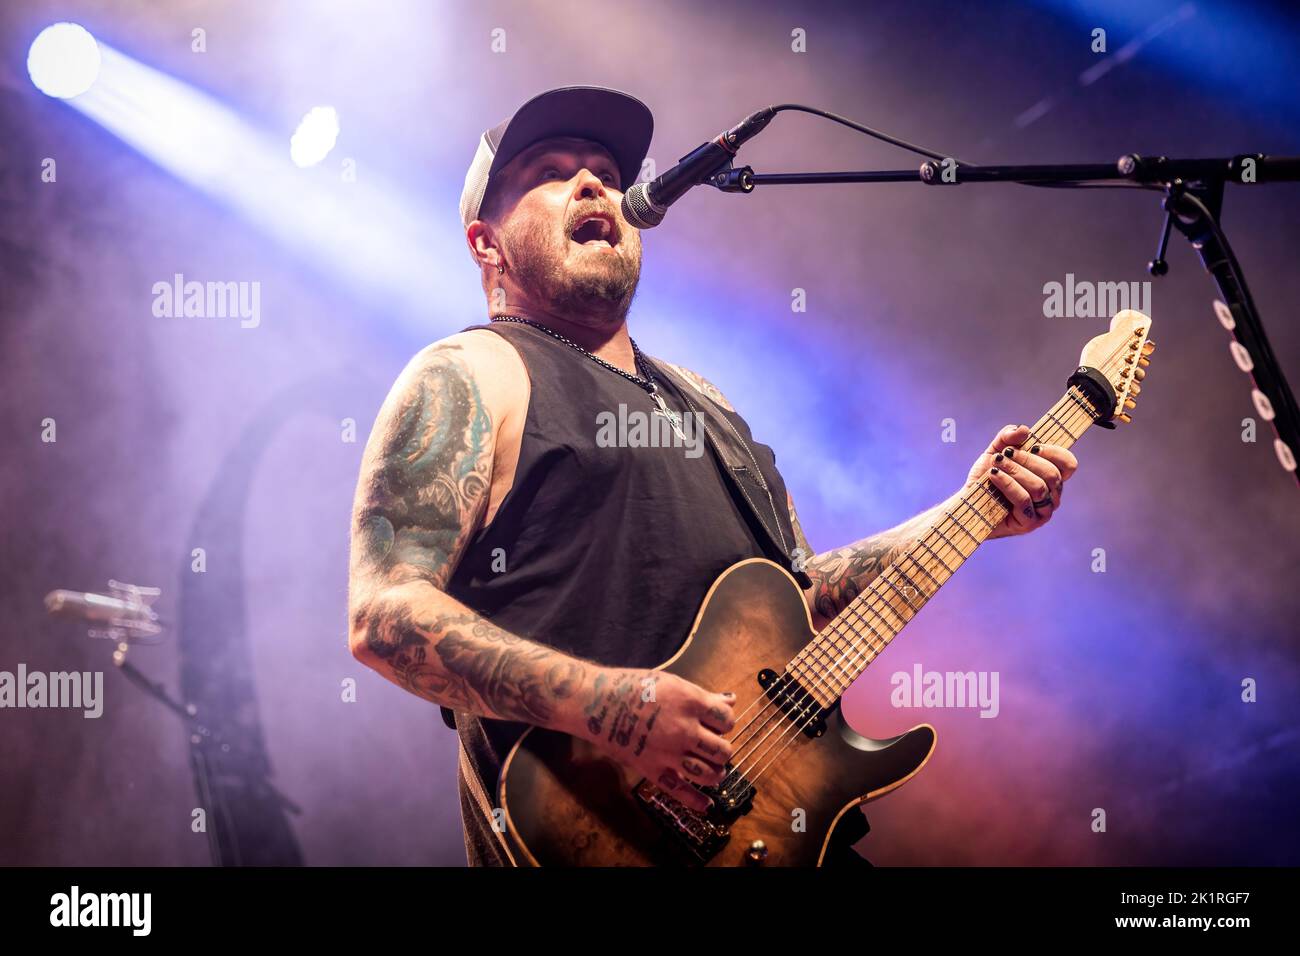 Oslo, Norway. 17th, September 2022. The American rock band Black Stone Cherry performs a live concert at Rockefeller in Oslo. Here vocalist and guitarist Chris Robertson is seen live on stage. (Photo credit: Gonzales Photo - Terje Dokken). Stock Photo